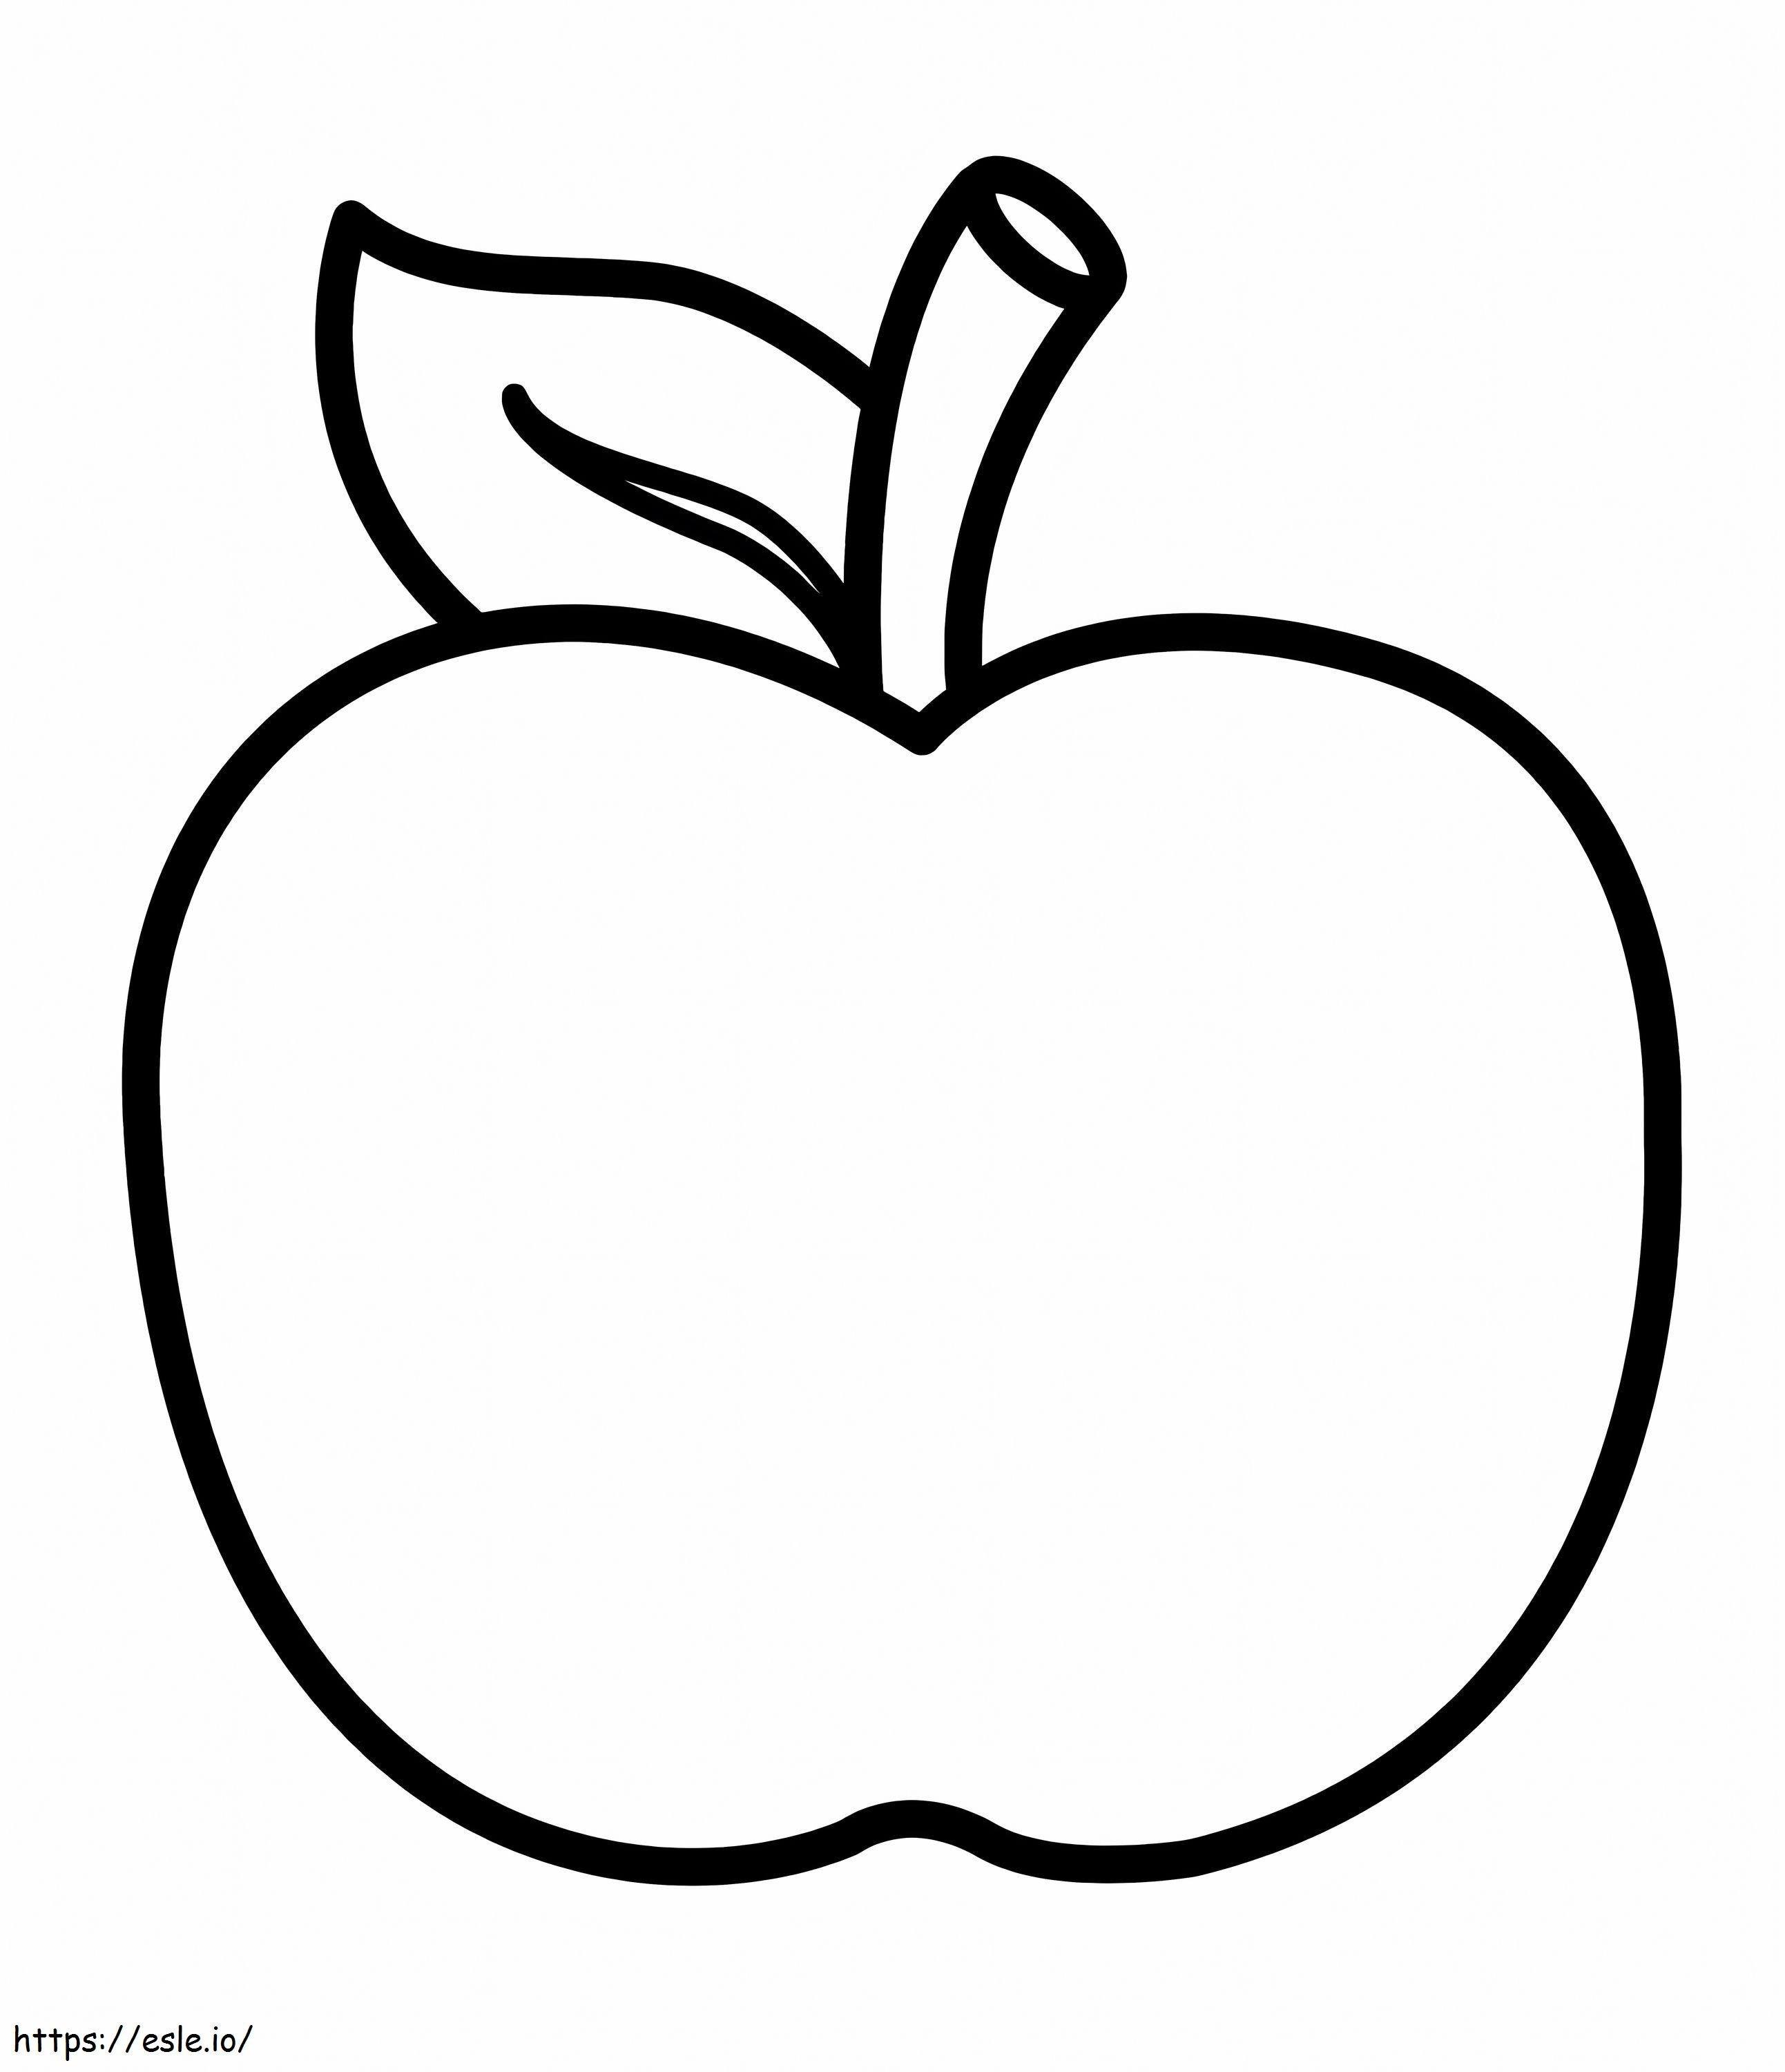 Normal Apple coloring page